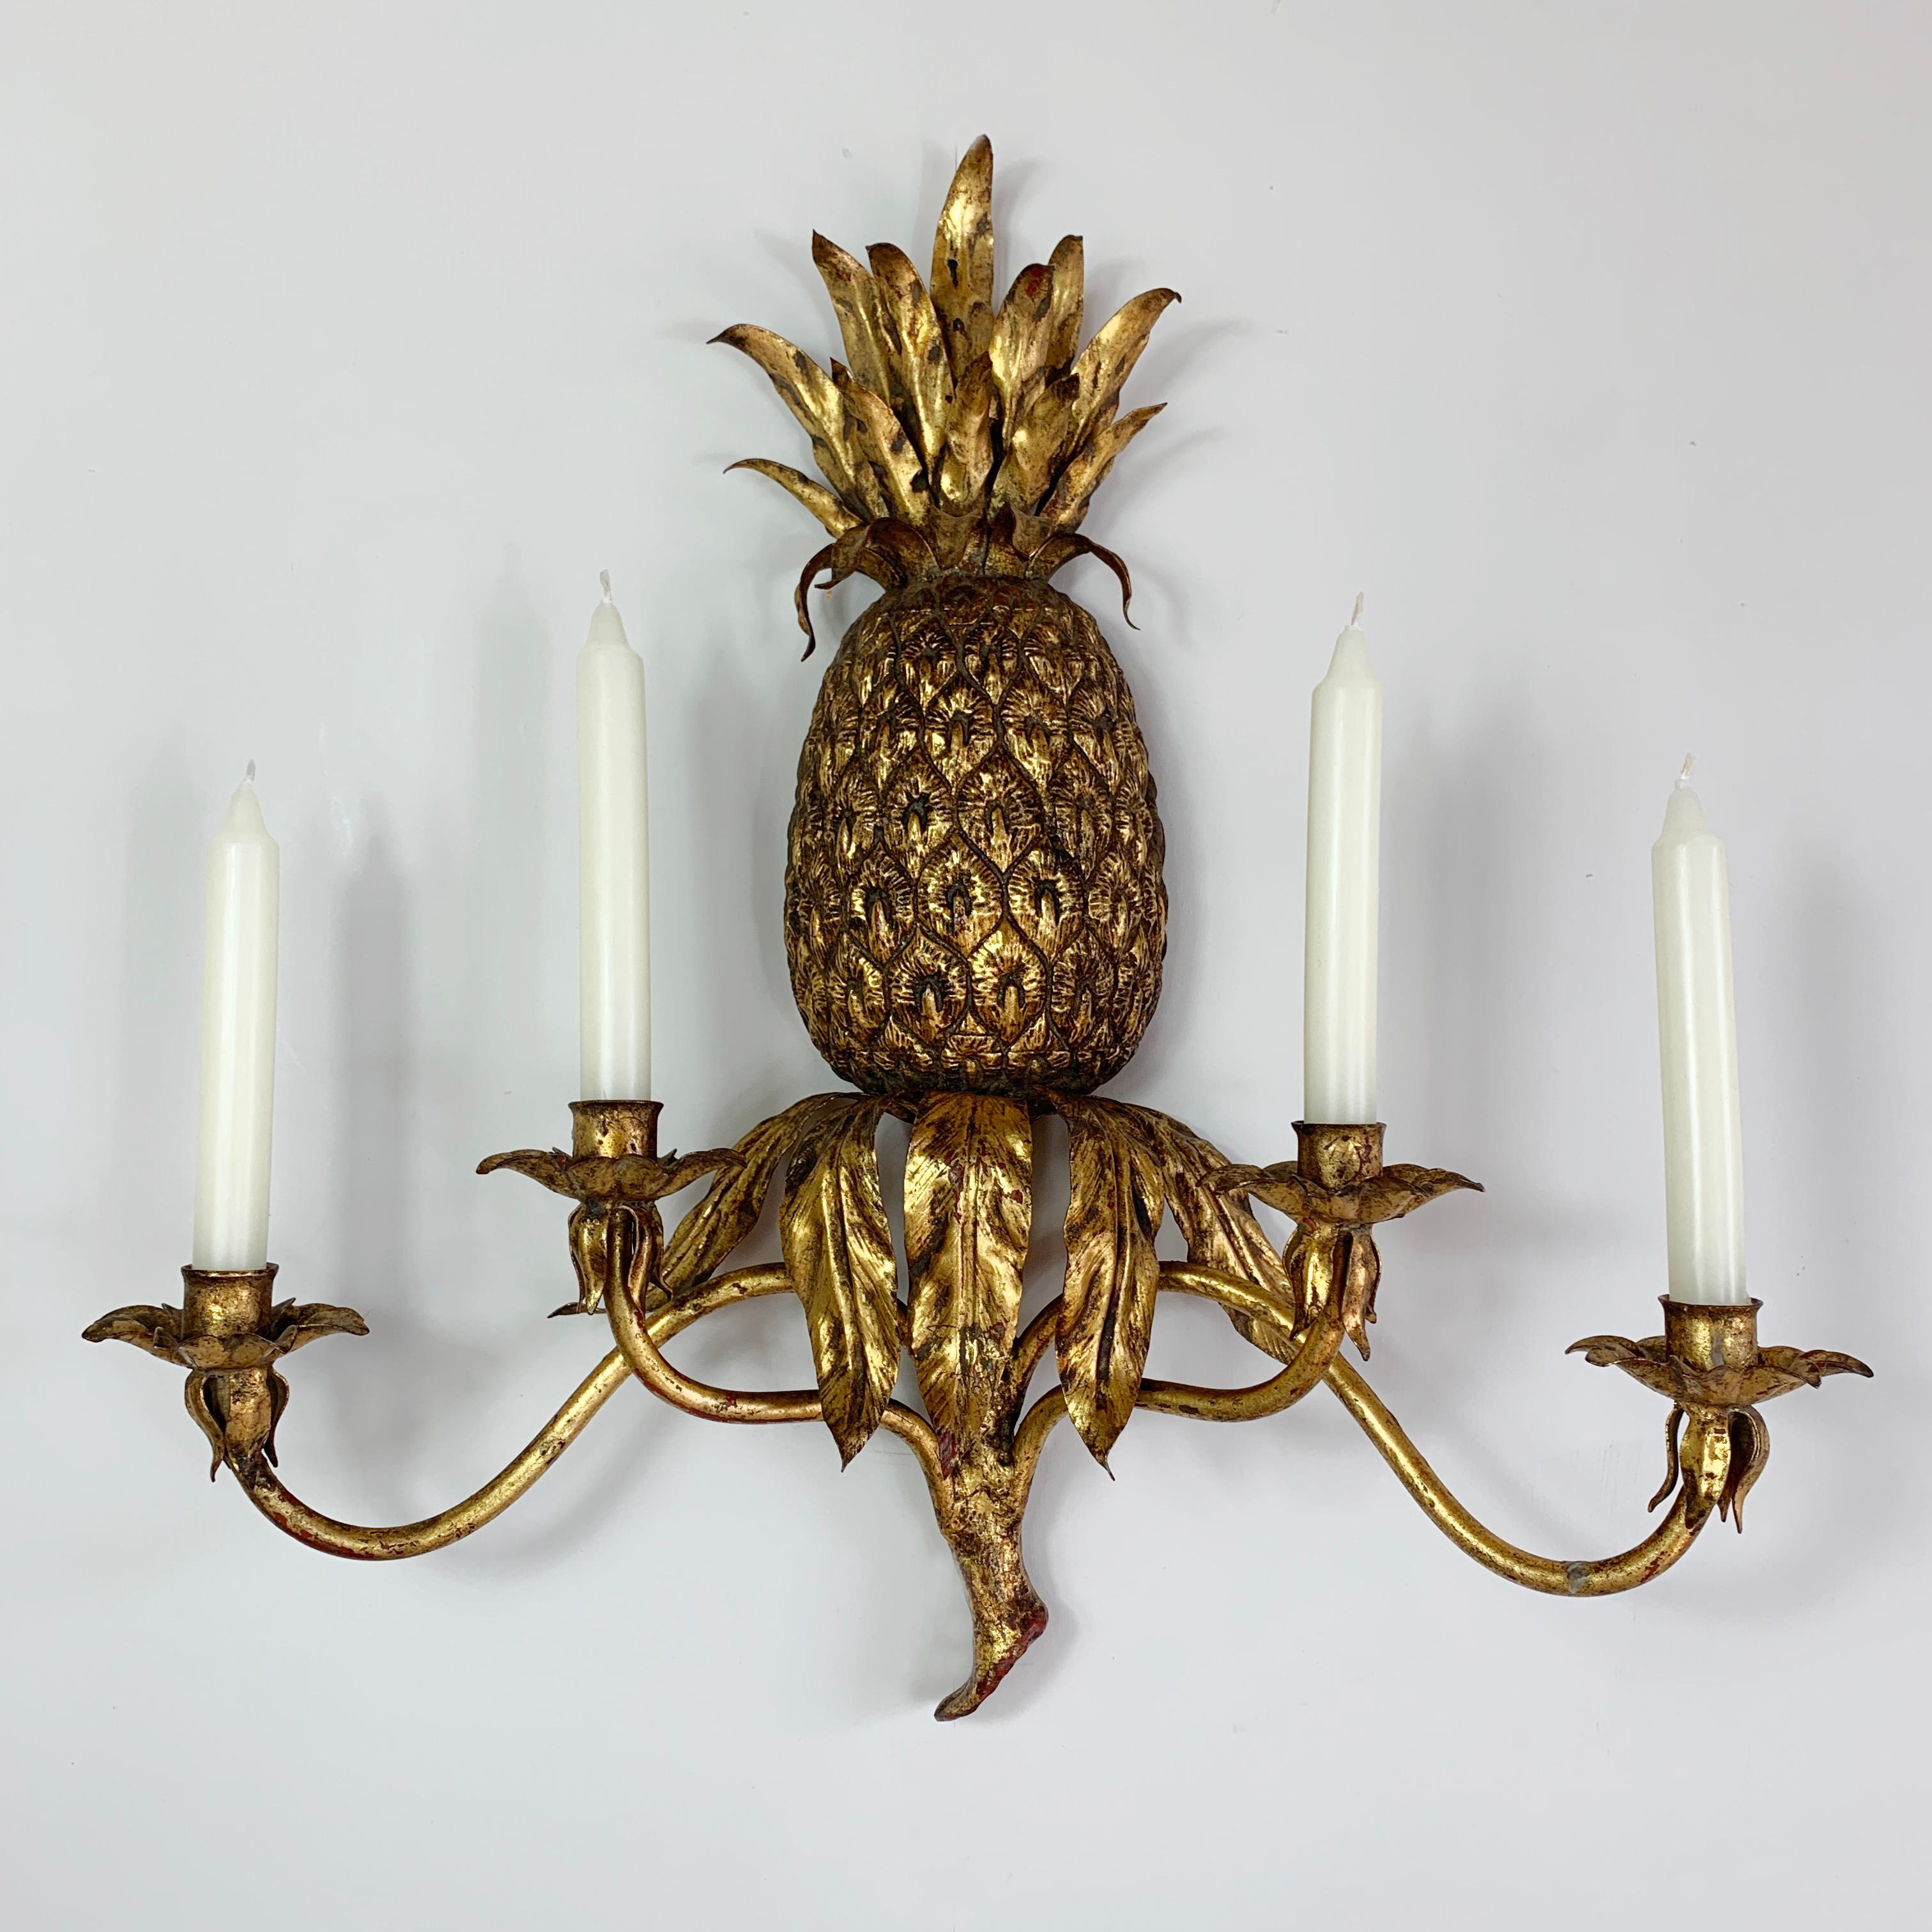 Italian Pineapple Candle Wall Sconce 1950’s Gold Wrought Iron  For Sale 1